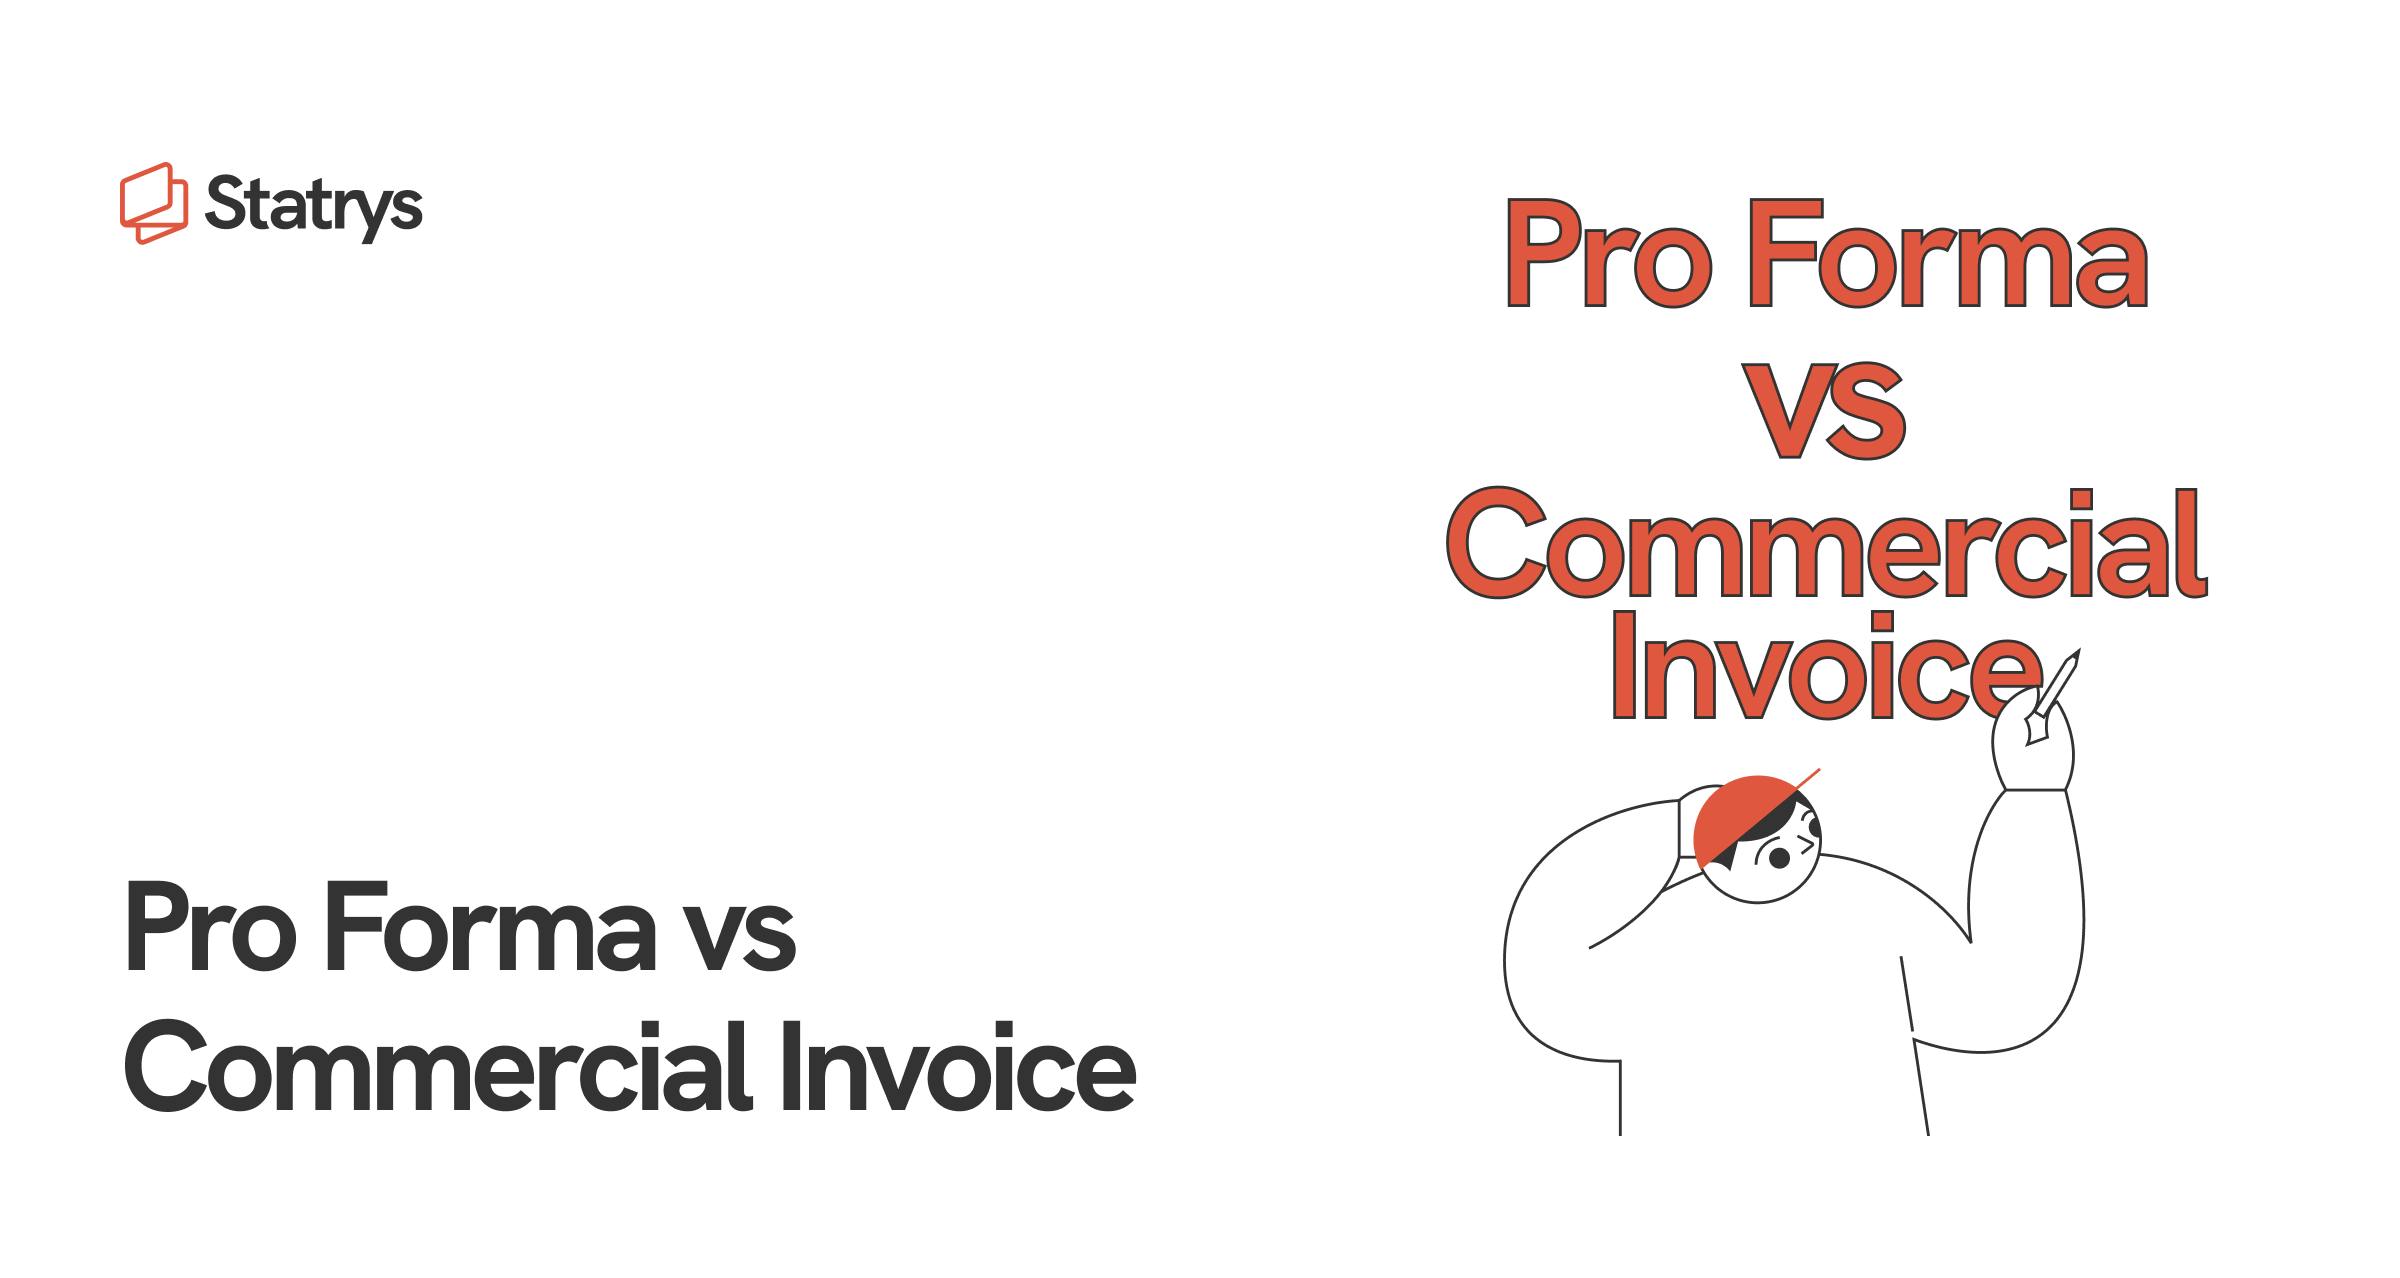 Pro forma and commercial invoice differences